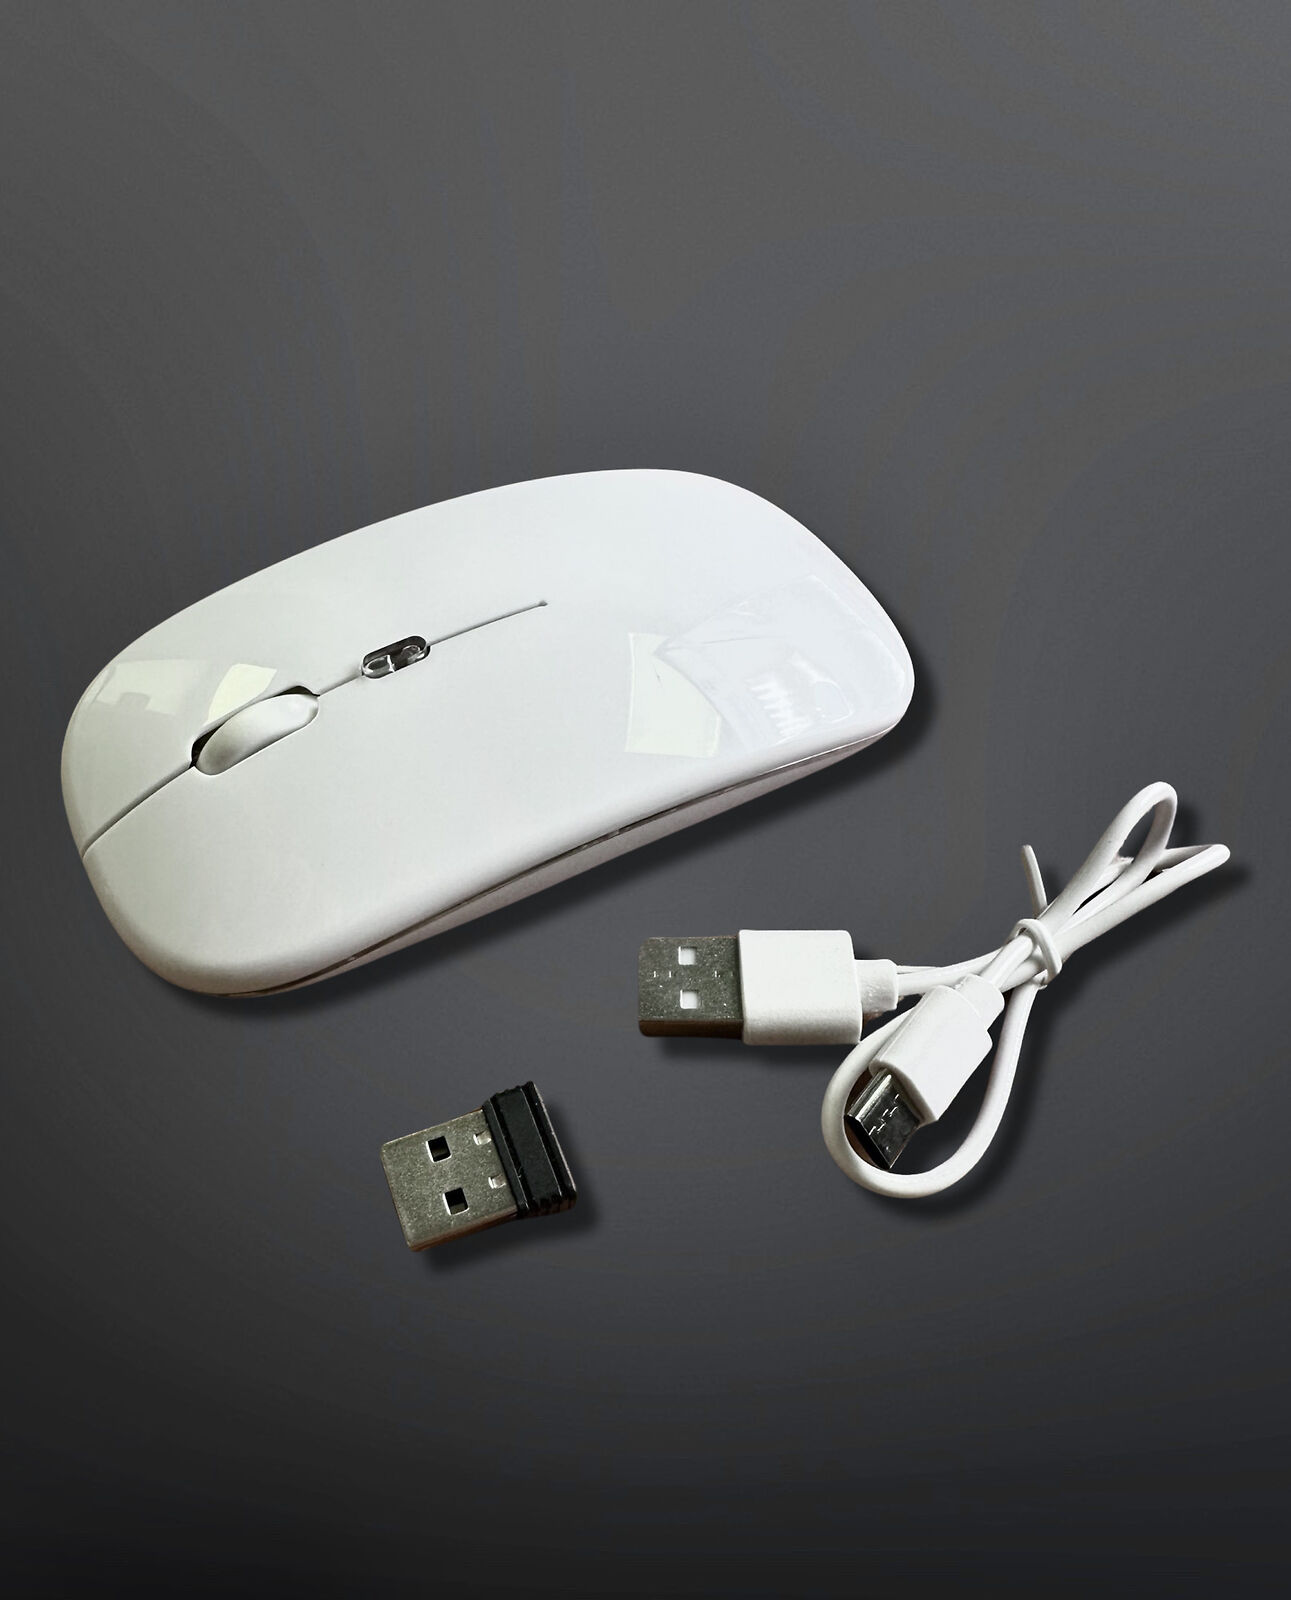 DQST 2.4G Wireless Optical Mouse USB Rechargeable RGB Cordless PC Laptop, White 